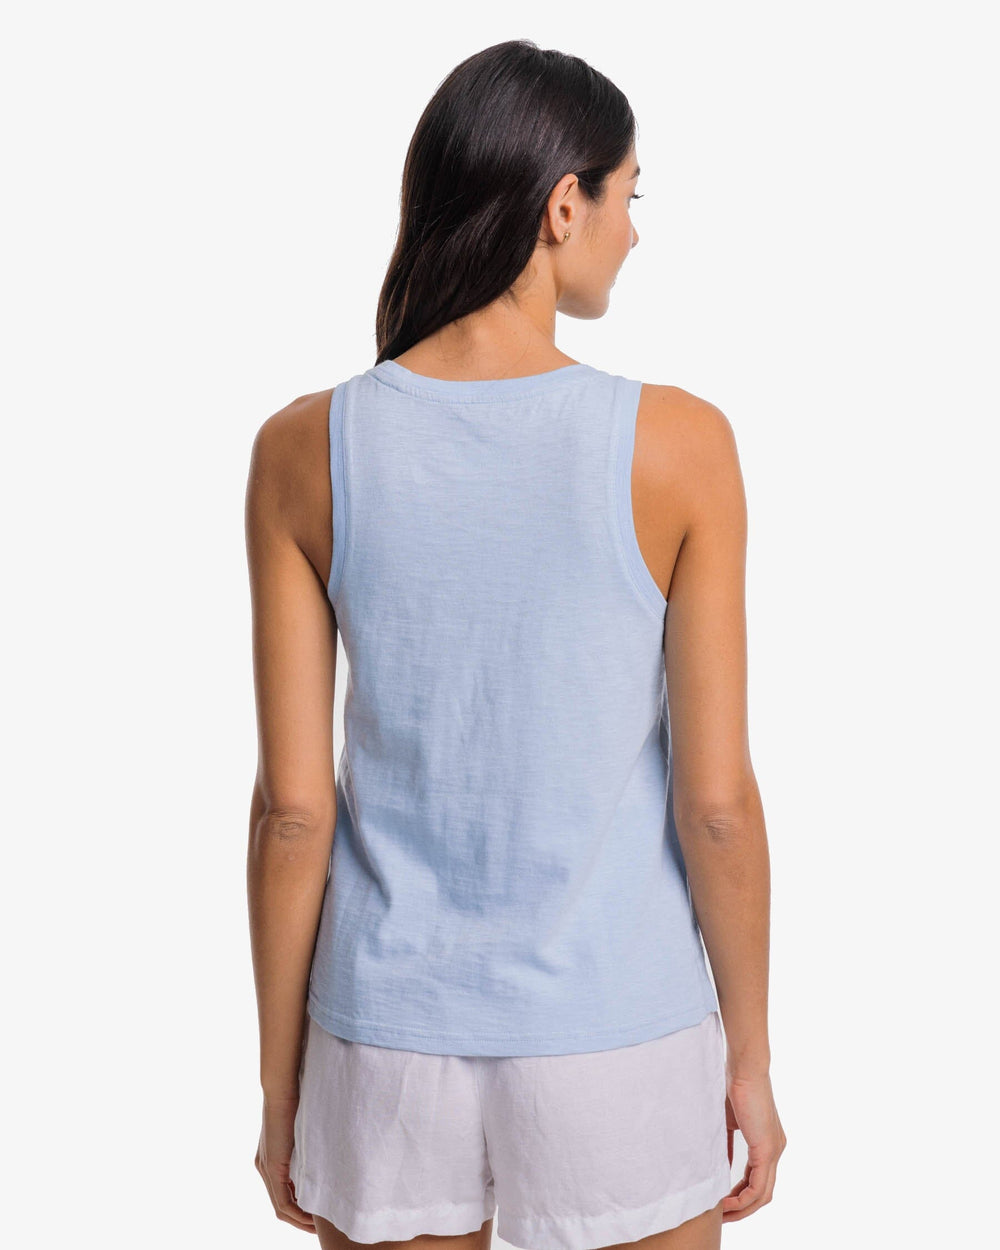 The back view of the Southern Tide Avah Sun Farer Tank by Southern Tide - Sky Blue